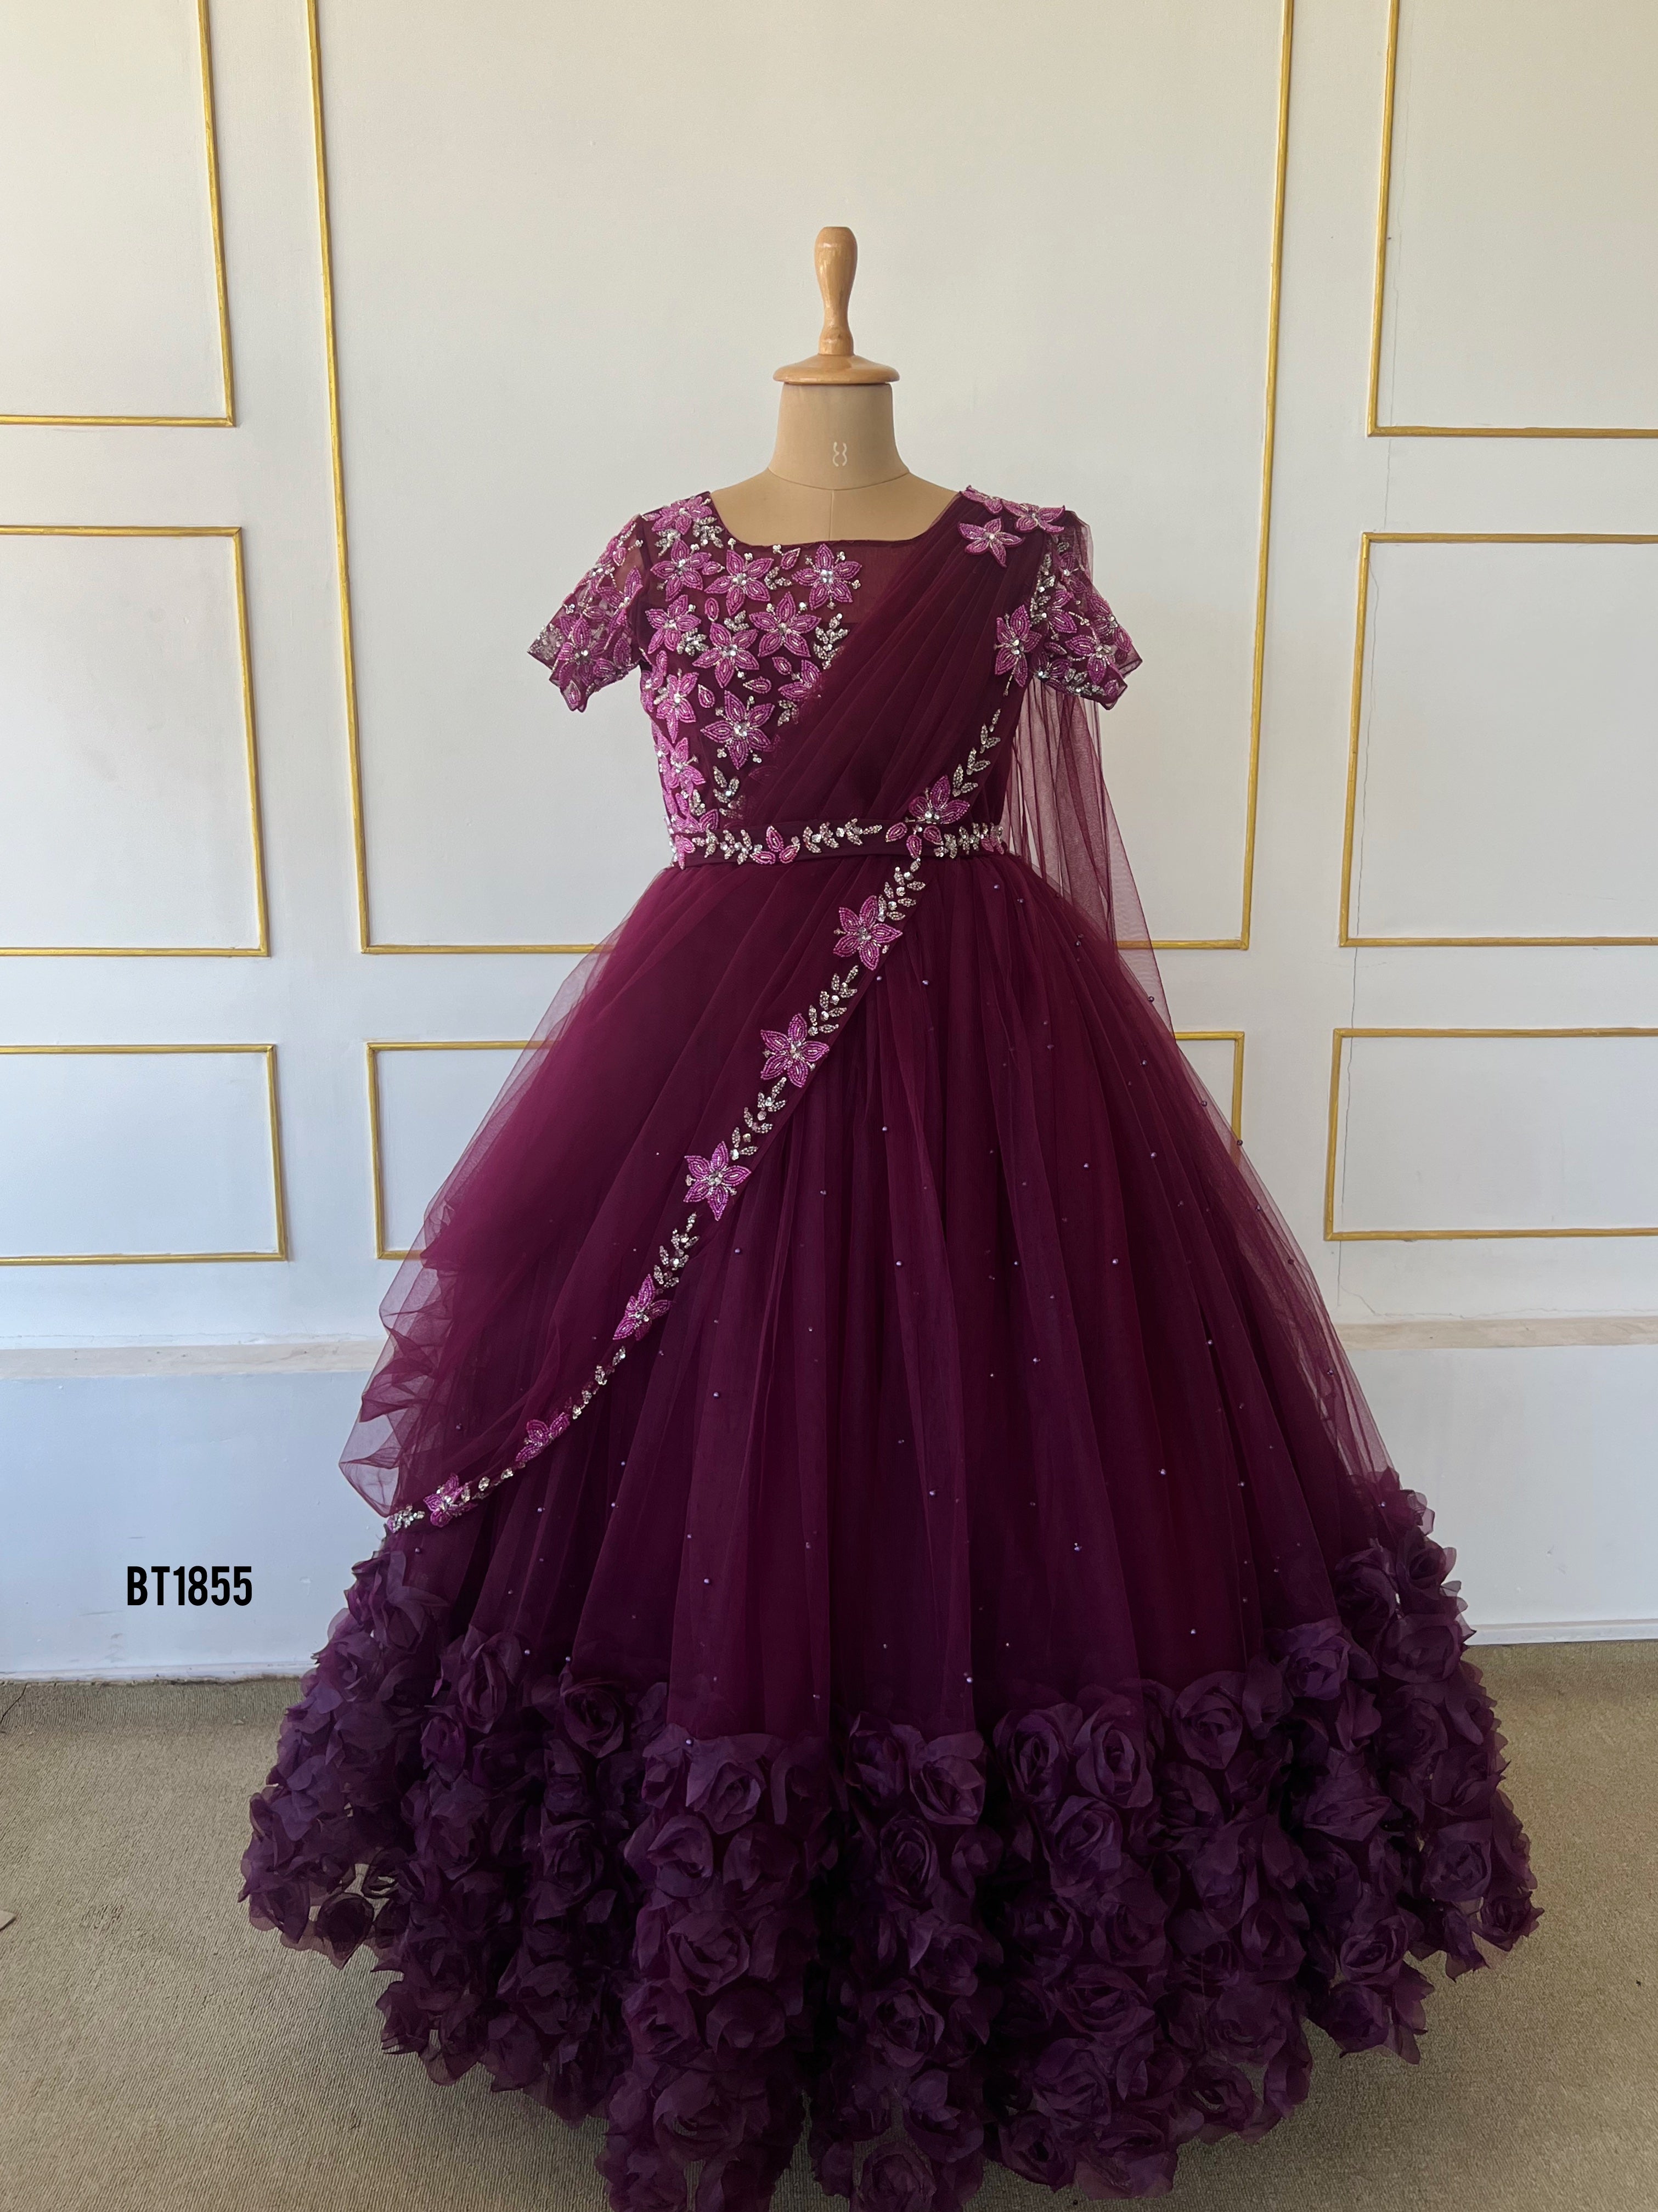 BT1855 Majestic Mauve Mommy & Me Gowns - Elegance for Two!